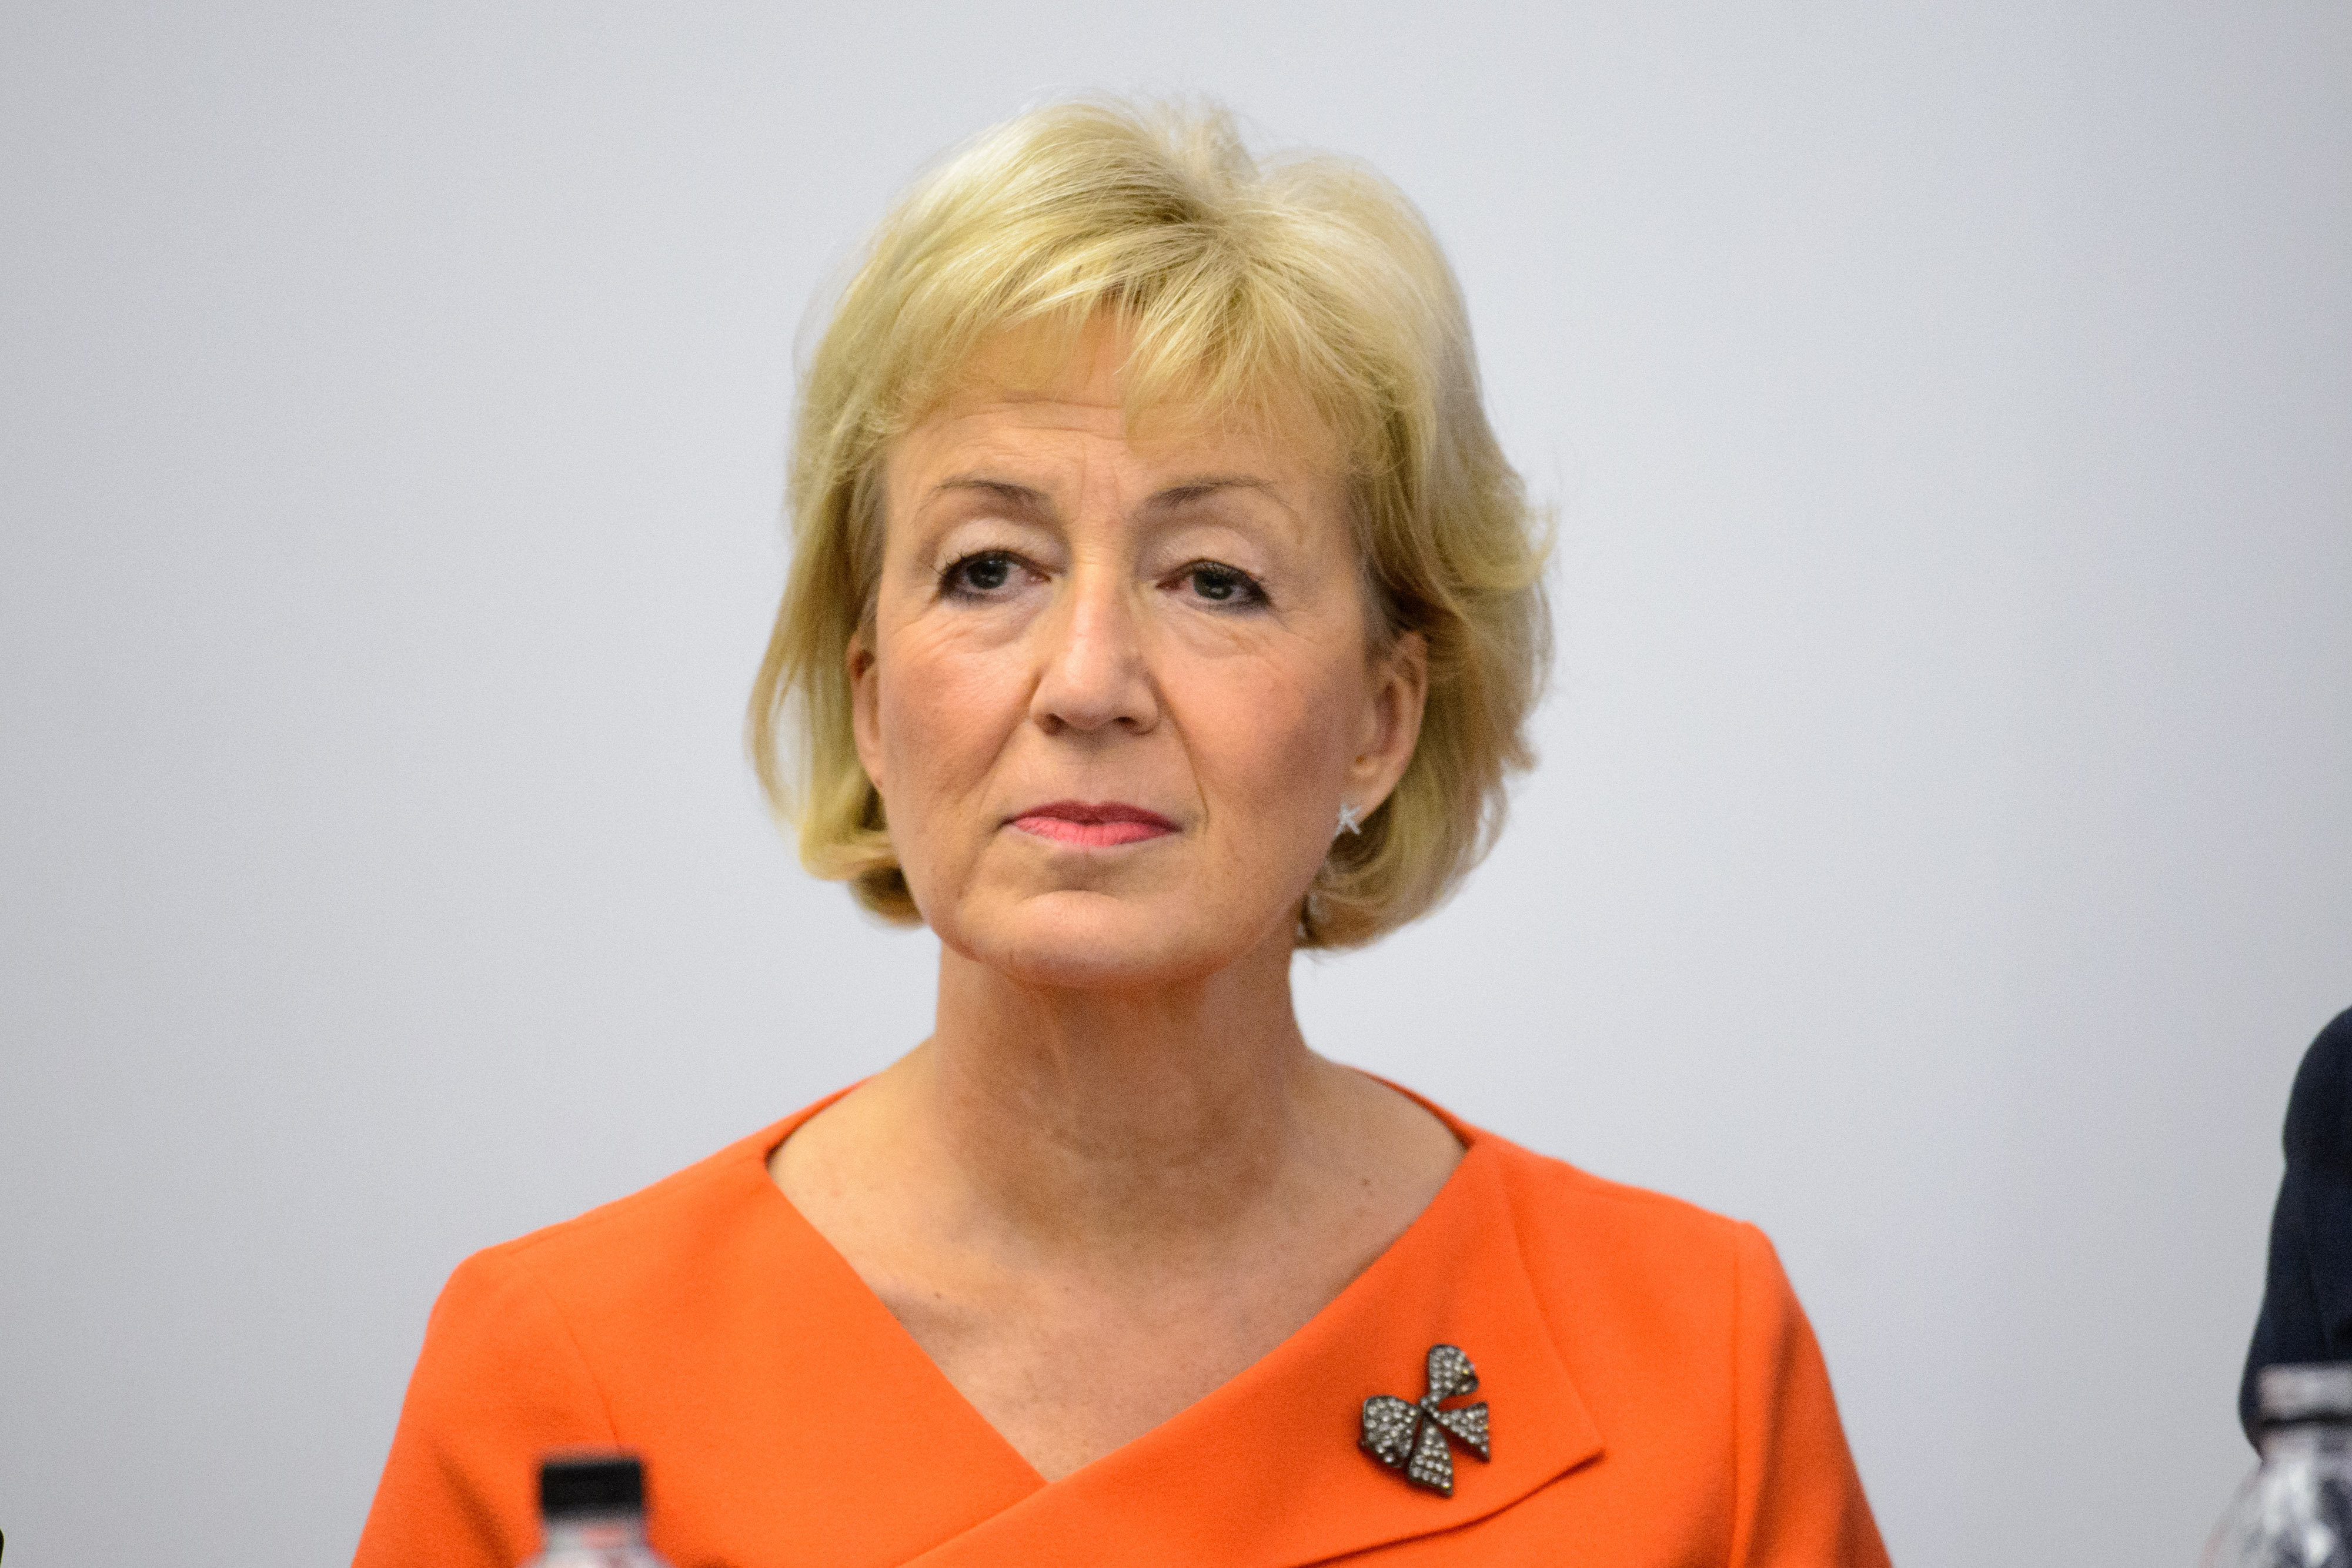 Andrea Leadsom said the issue of harassment was being taken "extremely seriously".